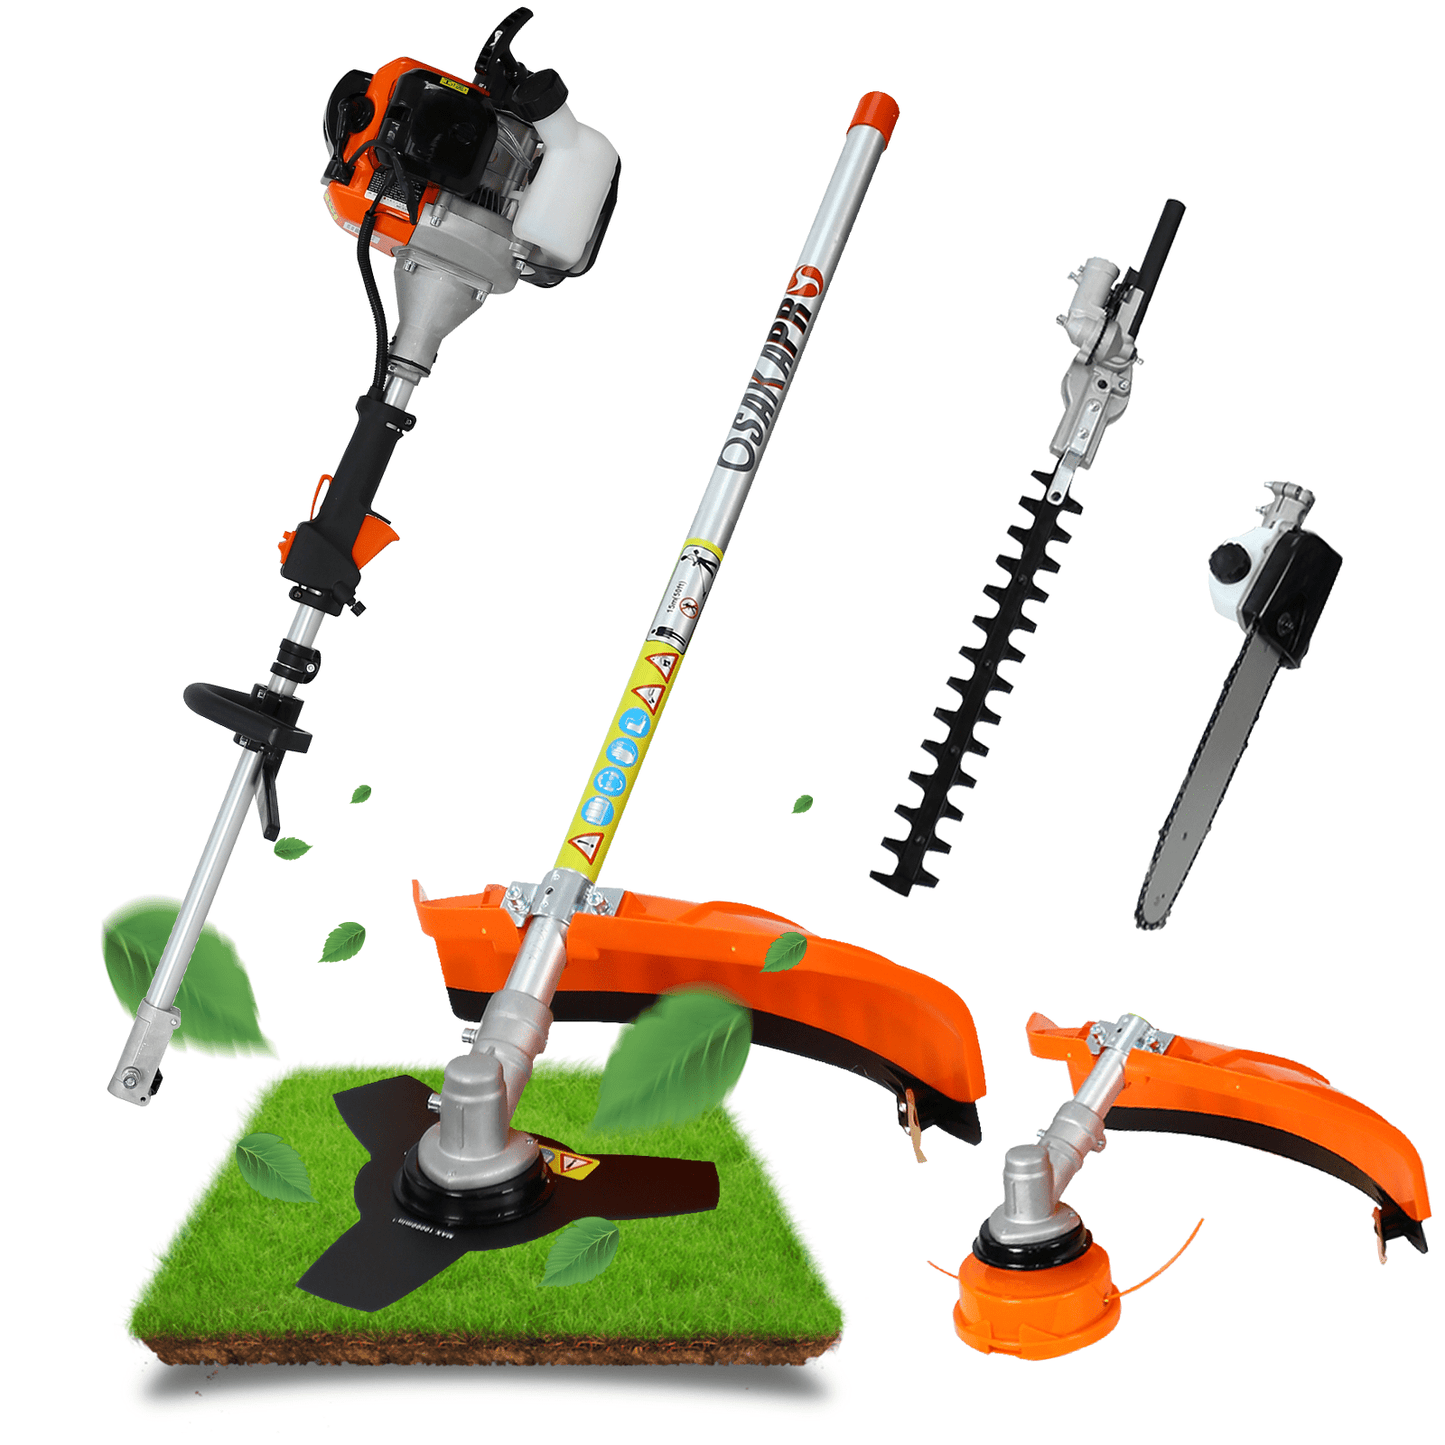 Grass Trimmer Weed Eater, 4 in 1 Gas Powered 2-Cycle String Trimmer with Gas Pole Saw, Hedge Trimmer, Grass Trimmer, and Brush Cutter for Outdoor Home Commercial